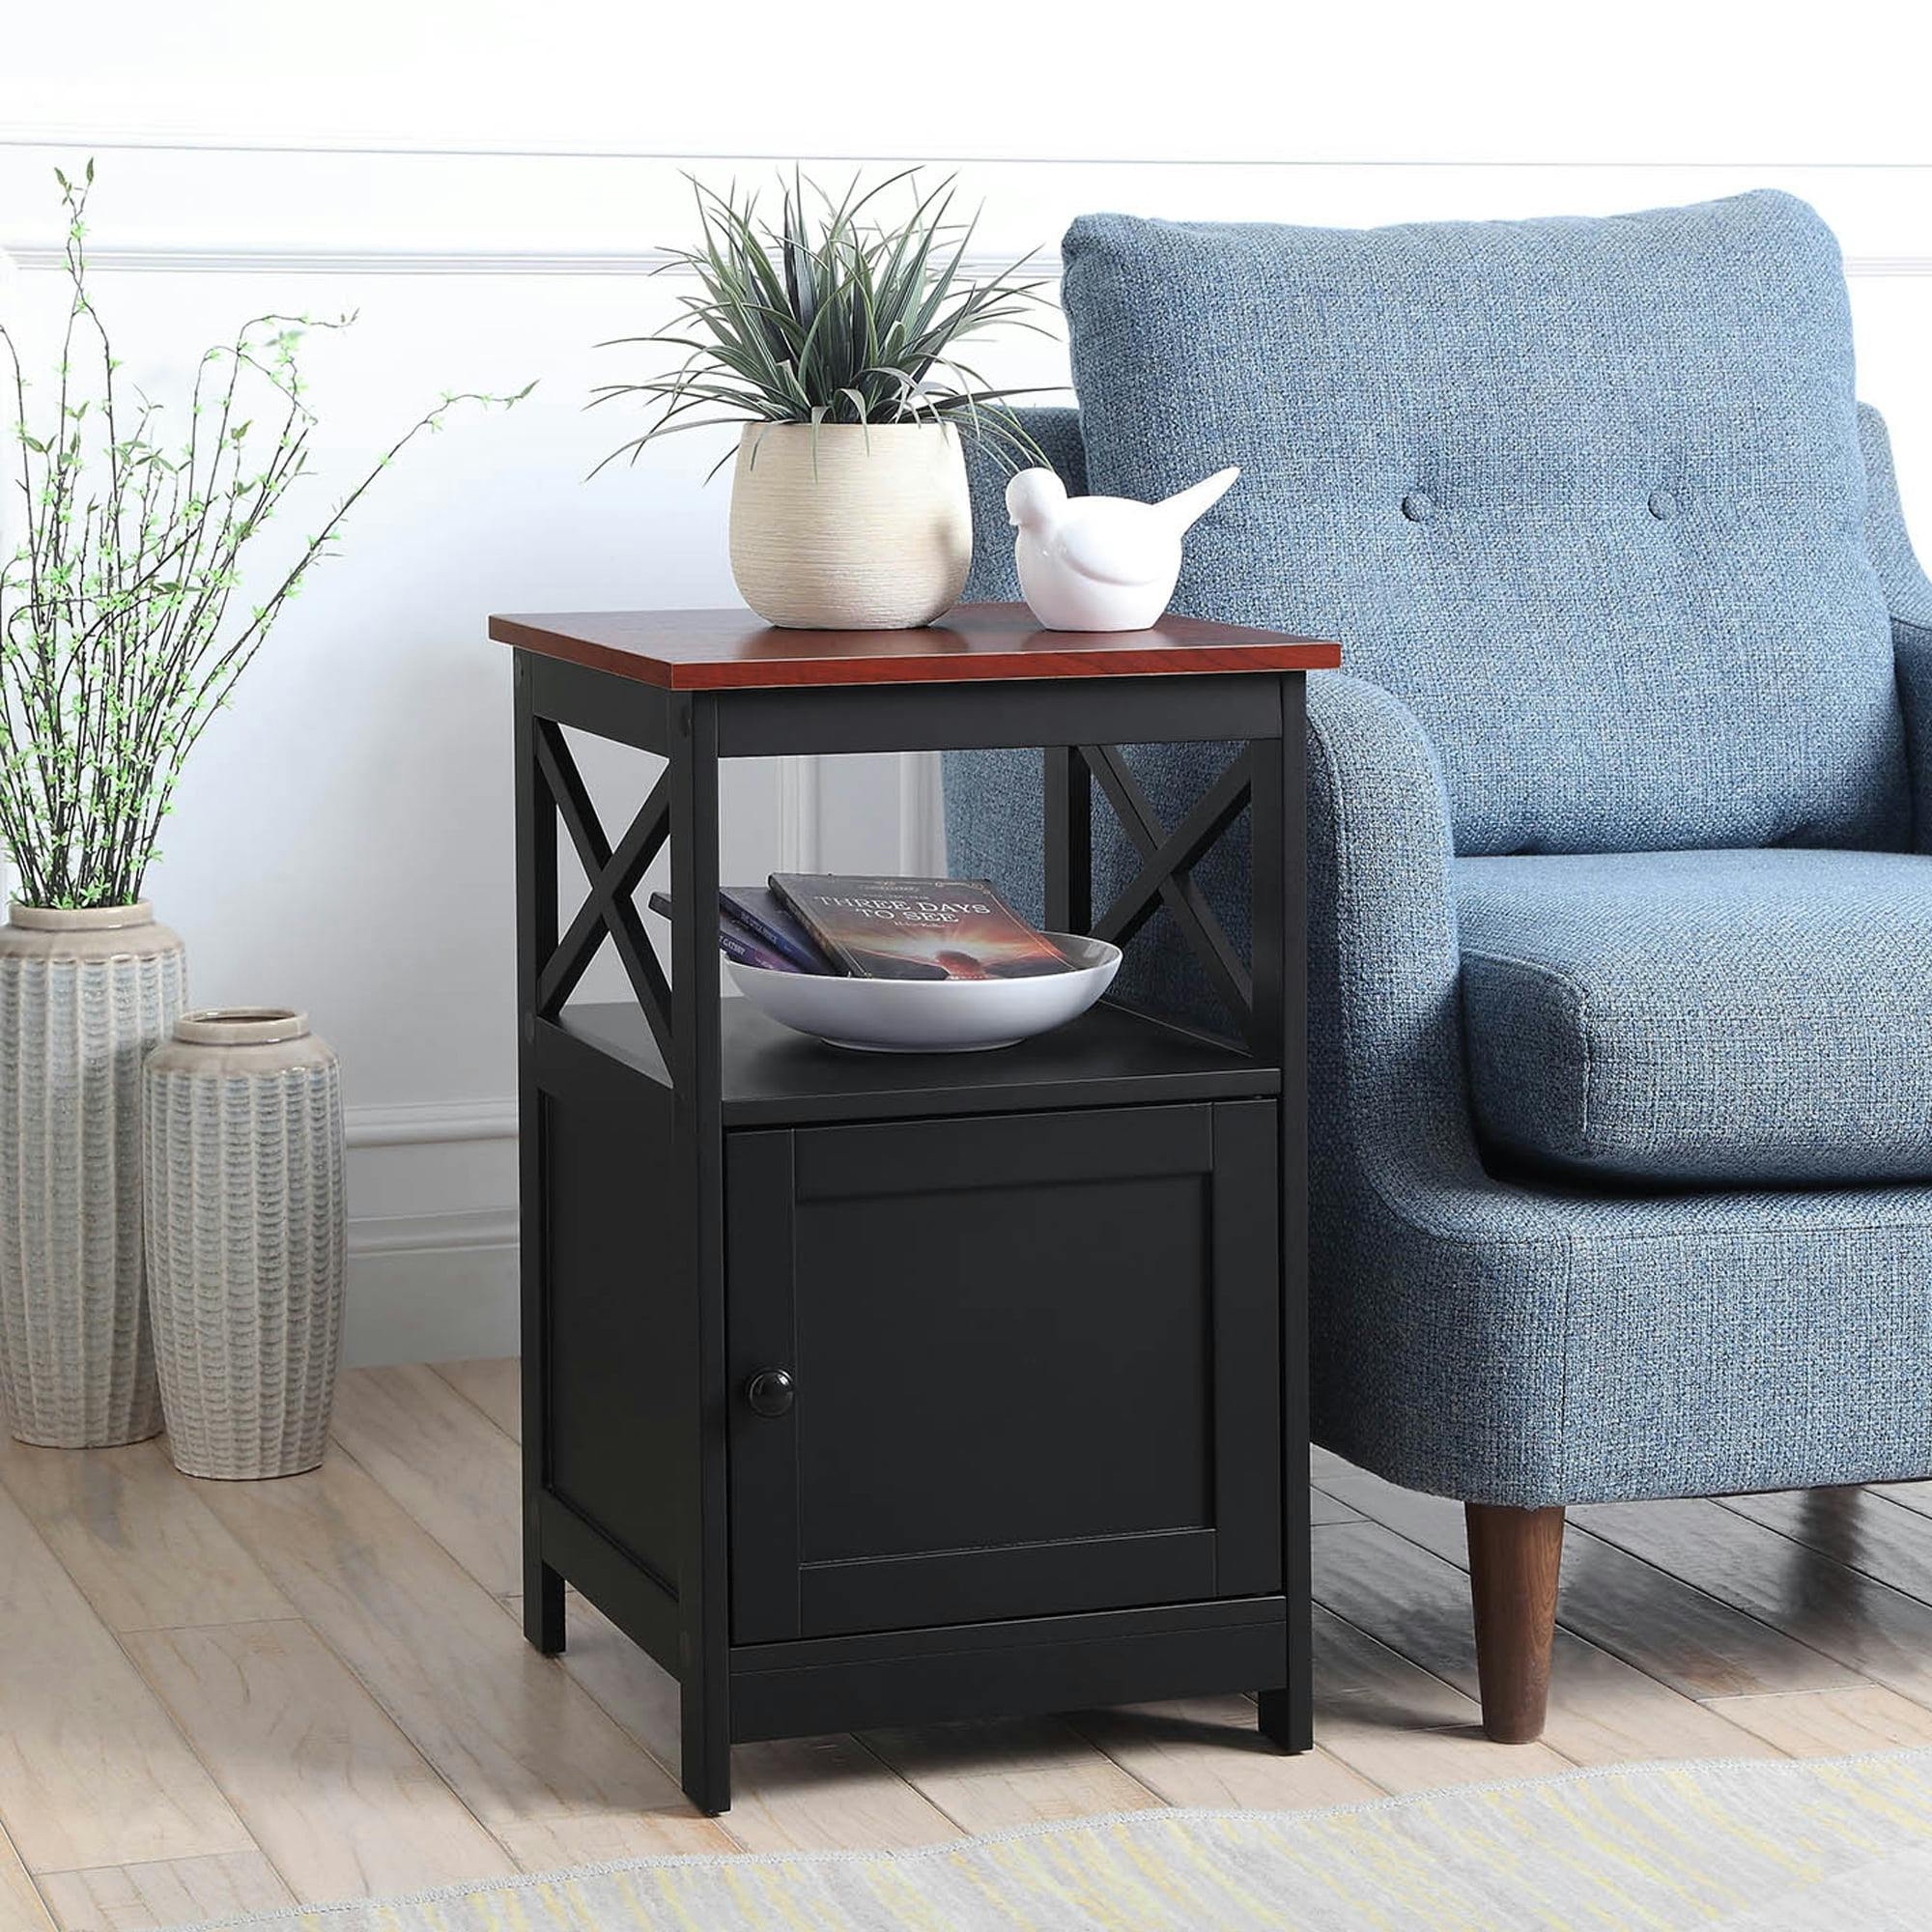 Cherry & Black Contemporary Square End Table with Cabinet Storage